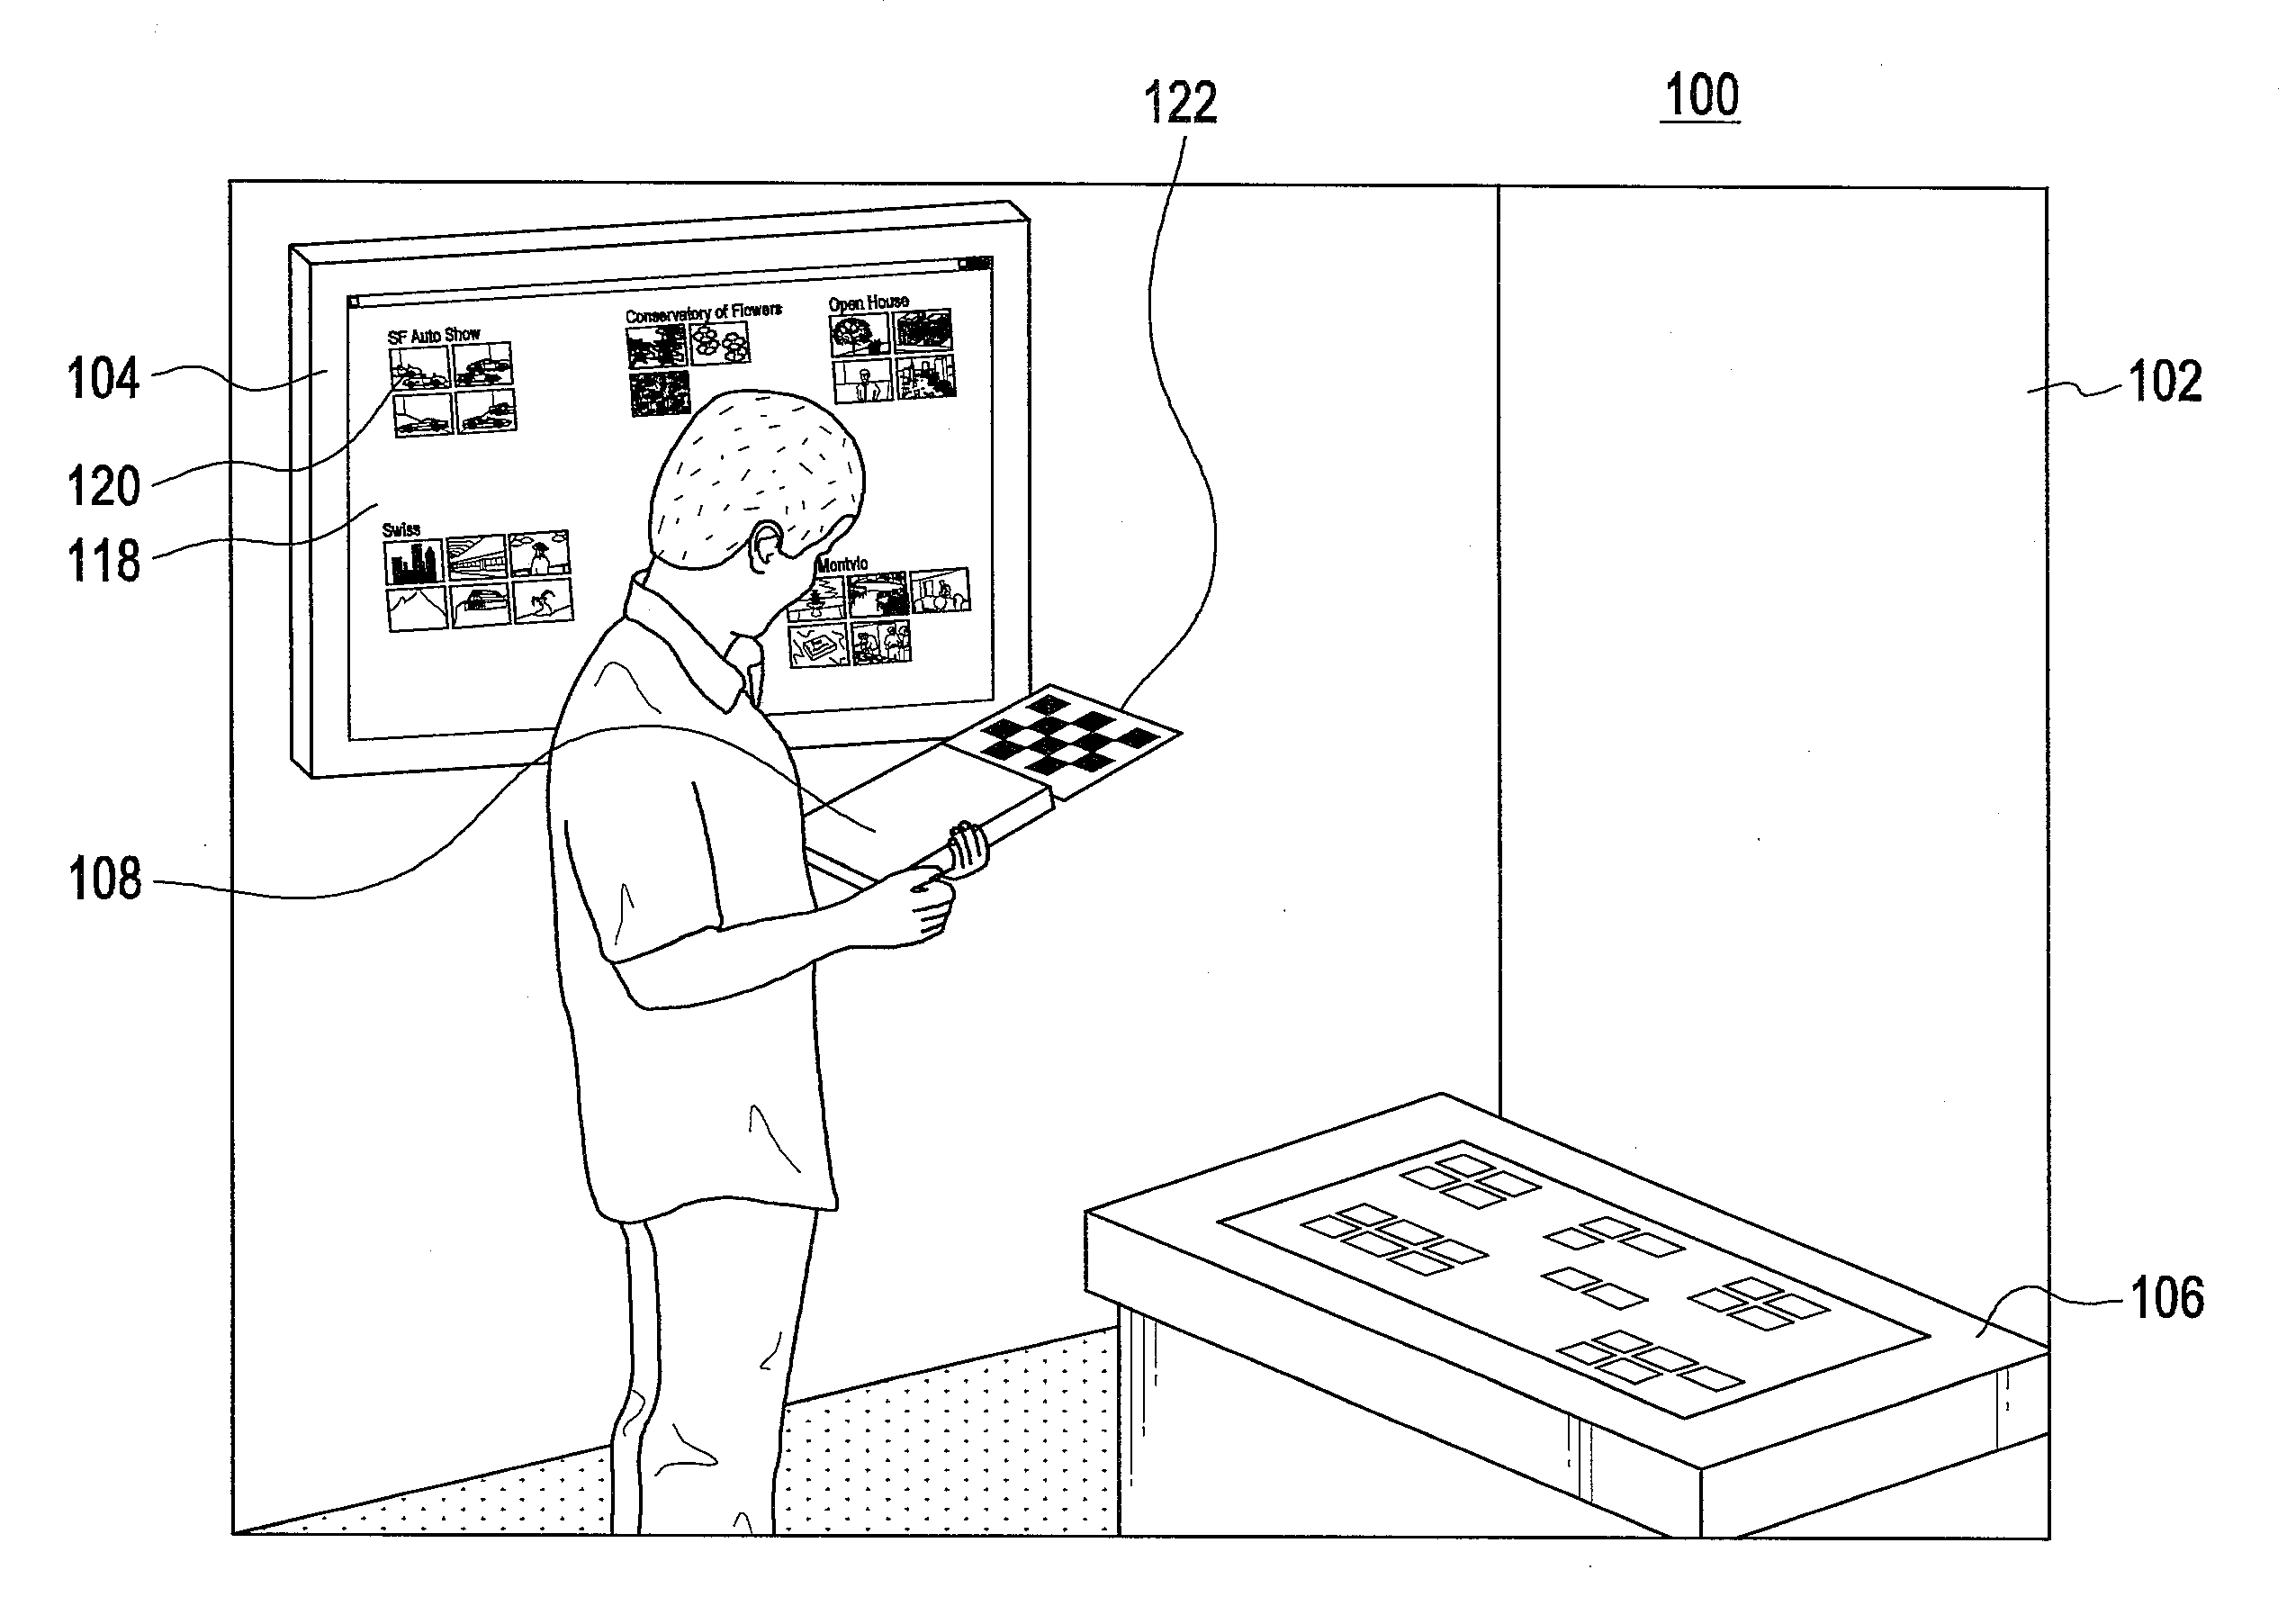 Systems and methods for information visualization in multi-display environments